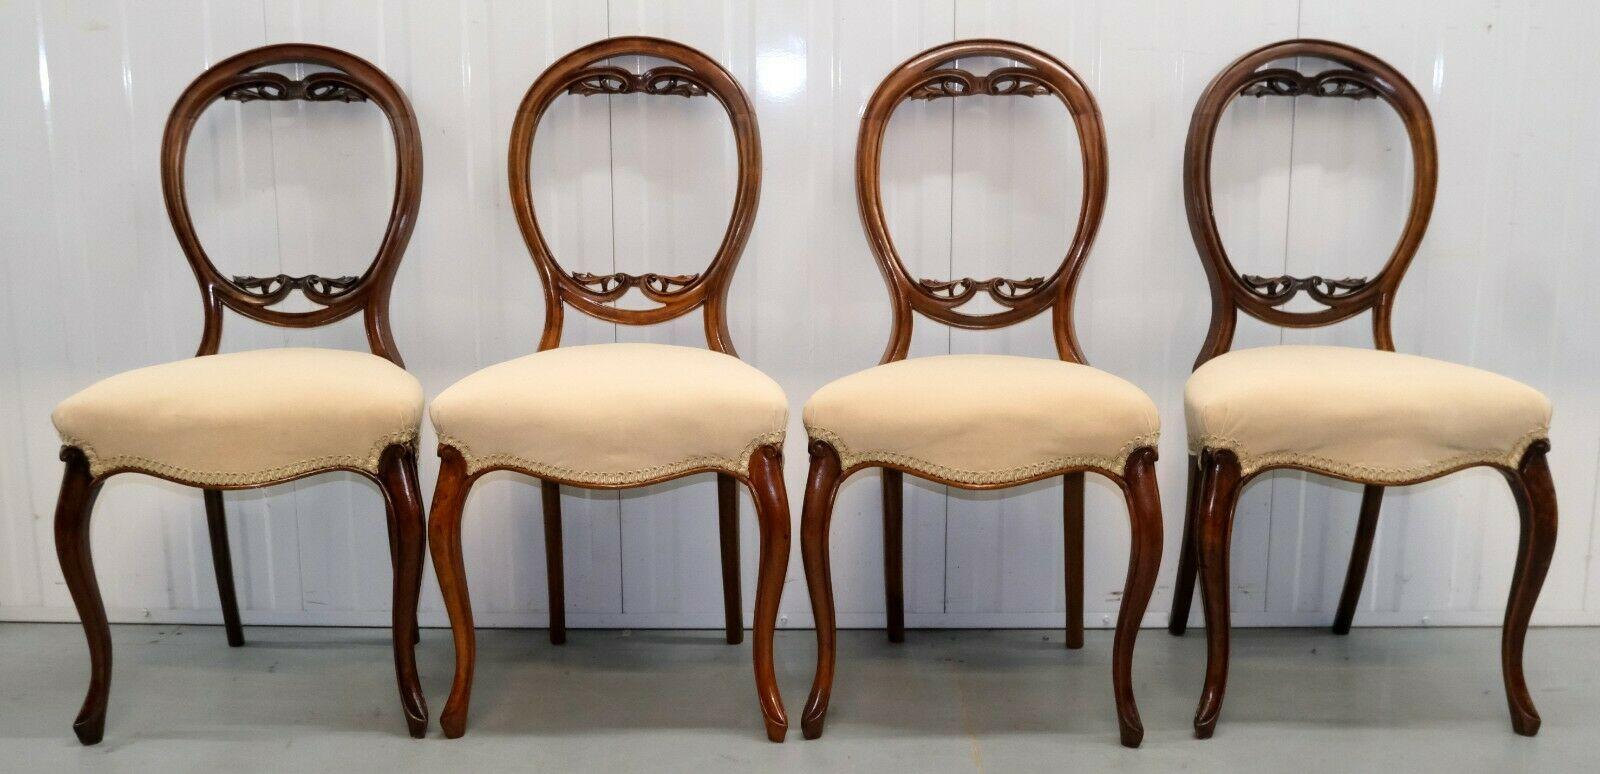 We are delighted to offer for sale this stylish set of four Antique Walnut balloon back on soft cream colour velvet seat dining chairs.

This set of popular designed chairs makes them fit around most styles of dining room perfectly. These chairs